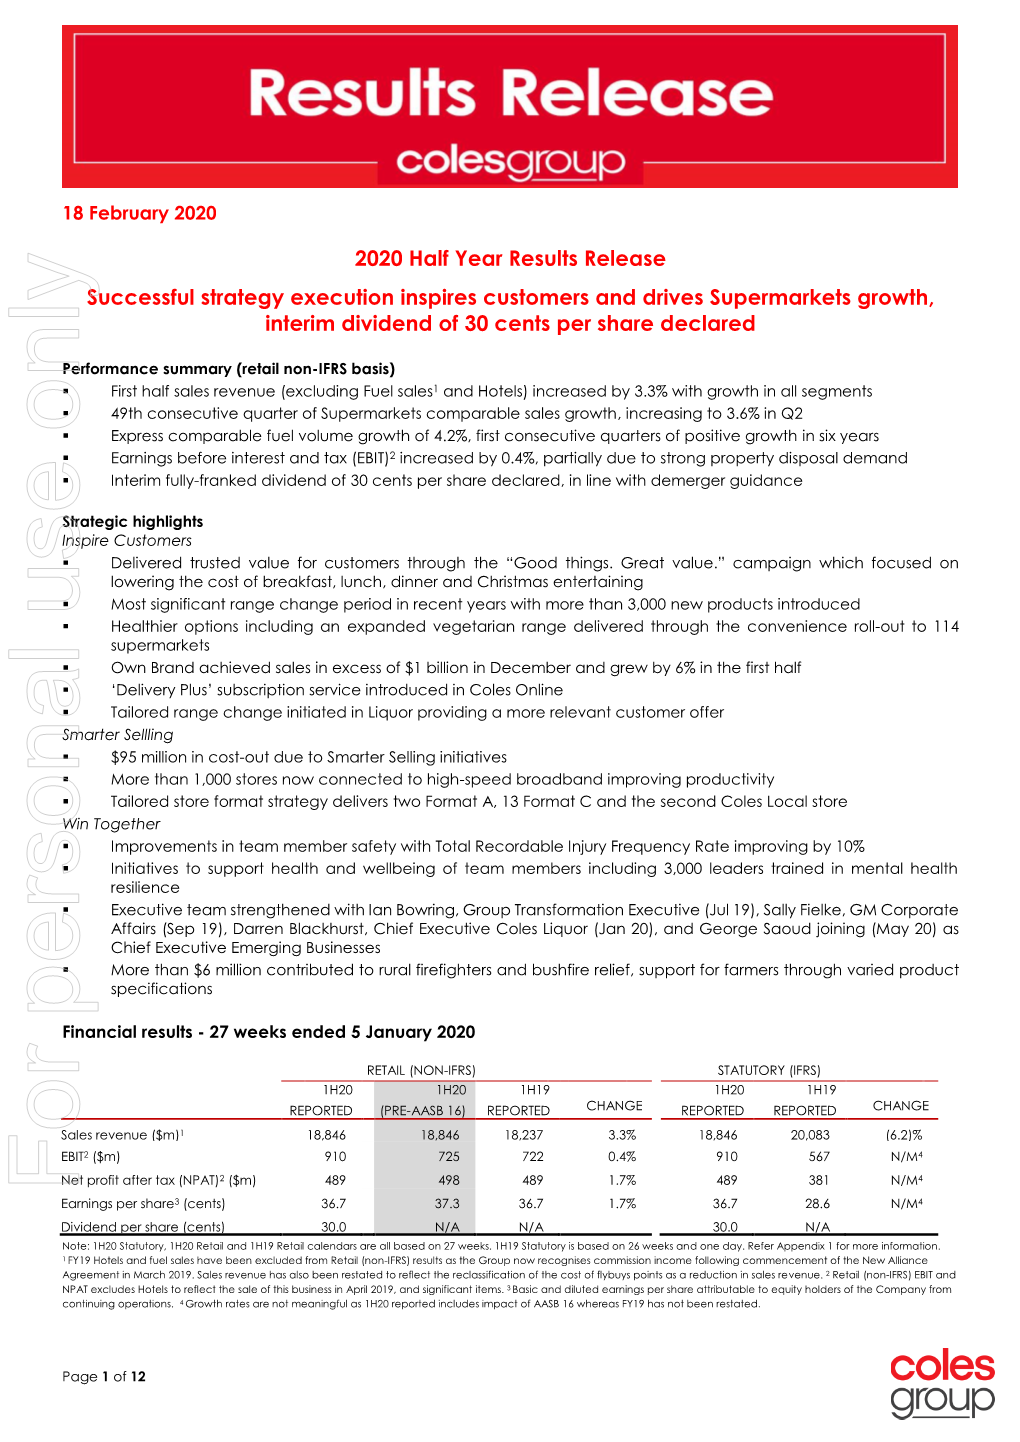 Coles Group Results Release 1H20